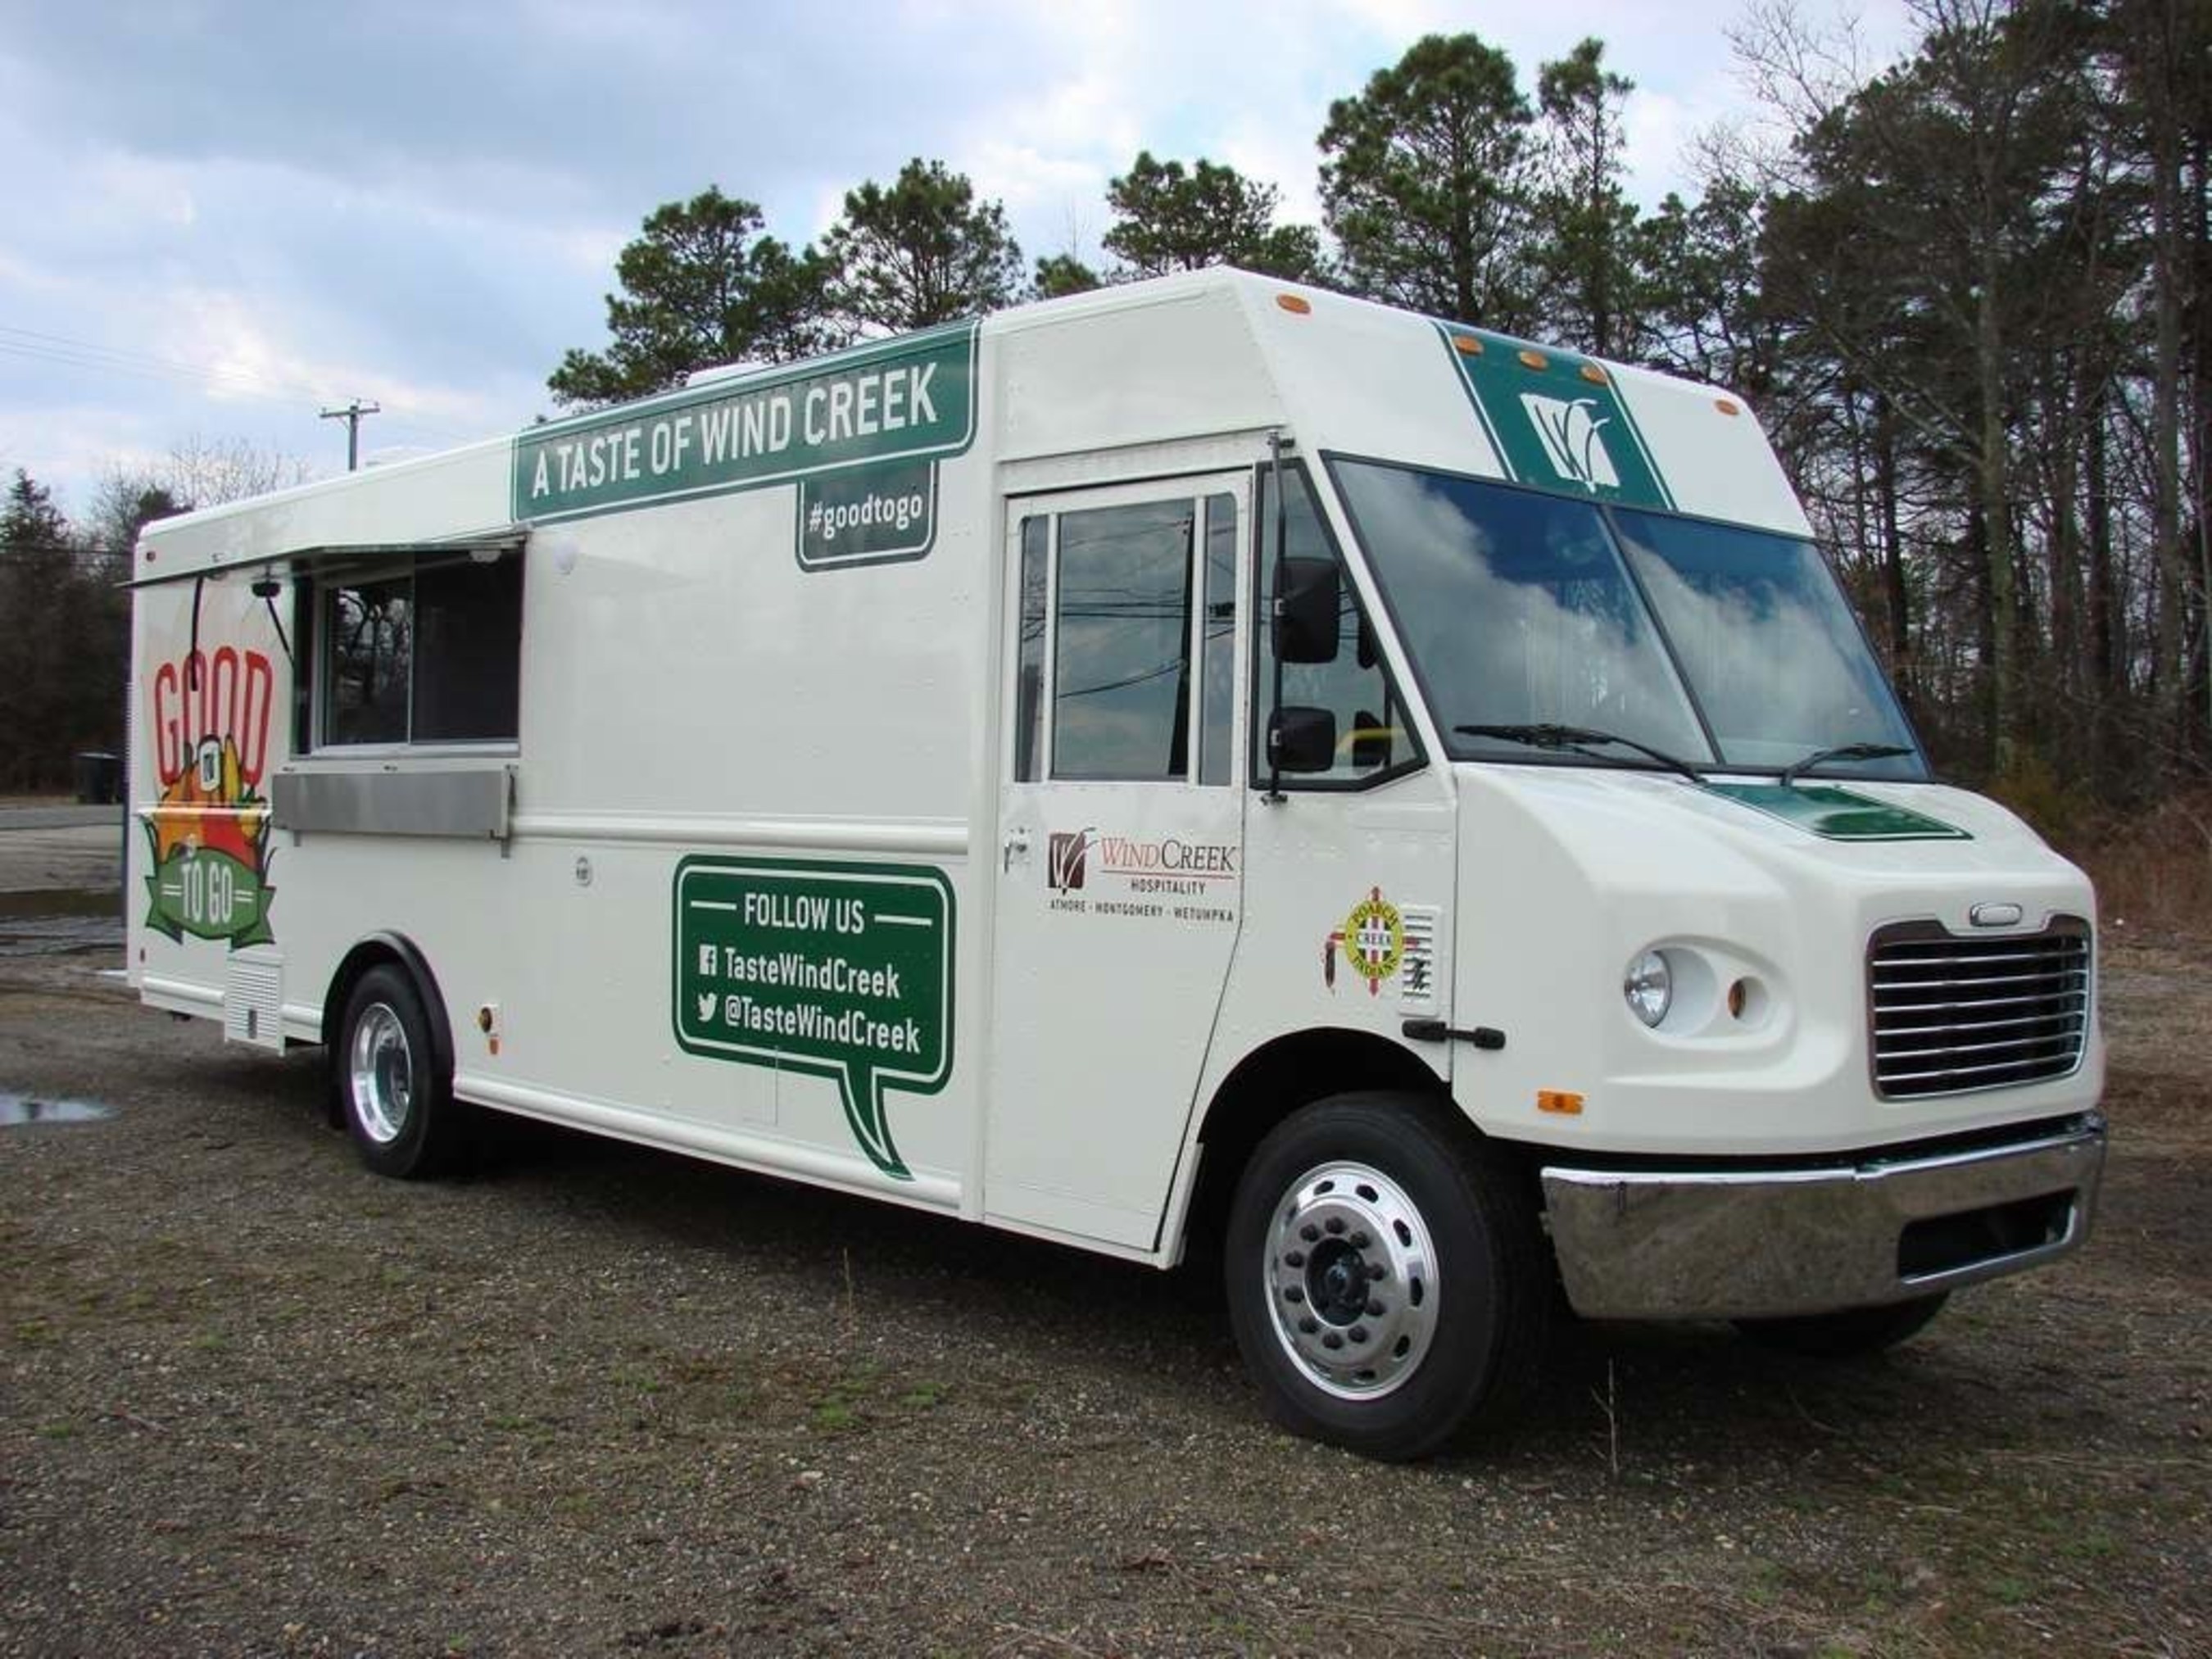 Wind Creek Hospitality "Good to Go" Food Truck travels the region serving the community.